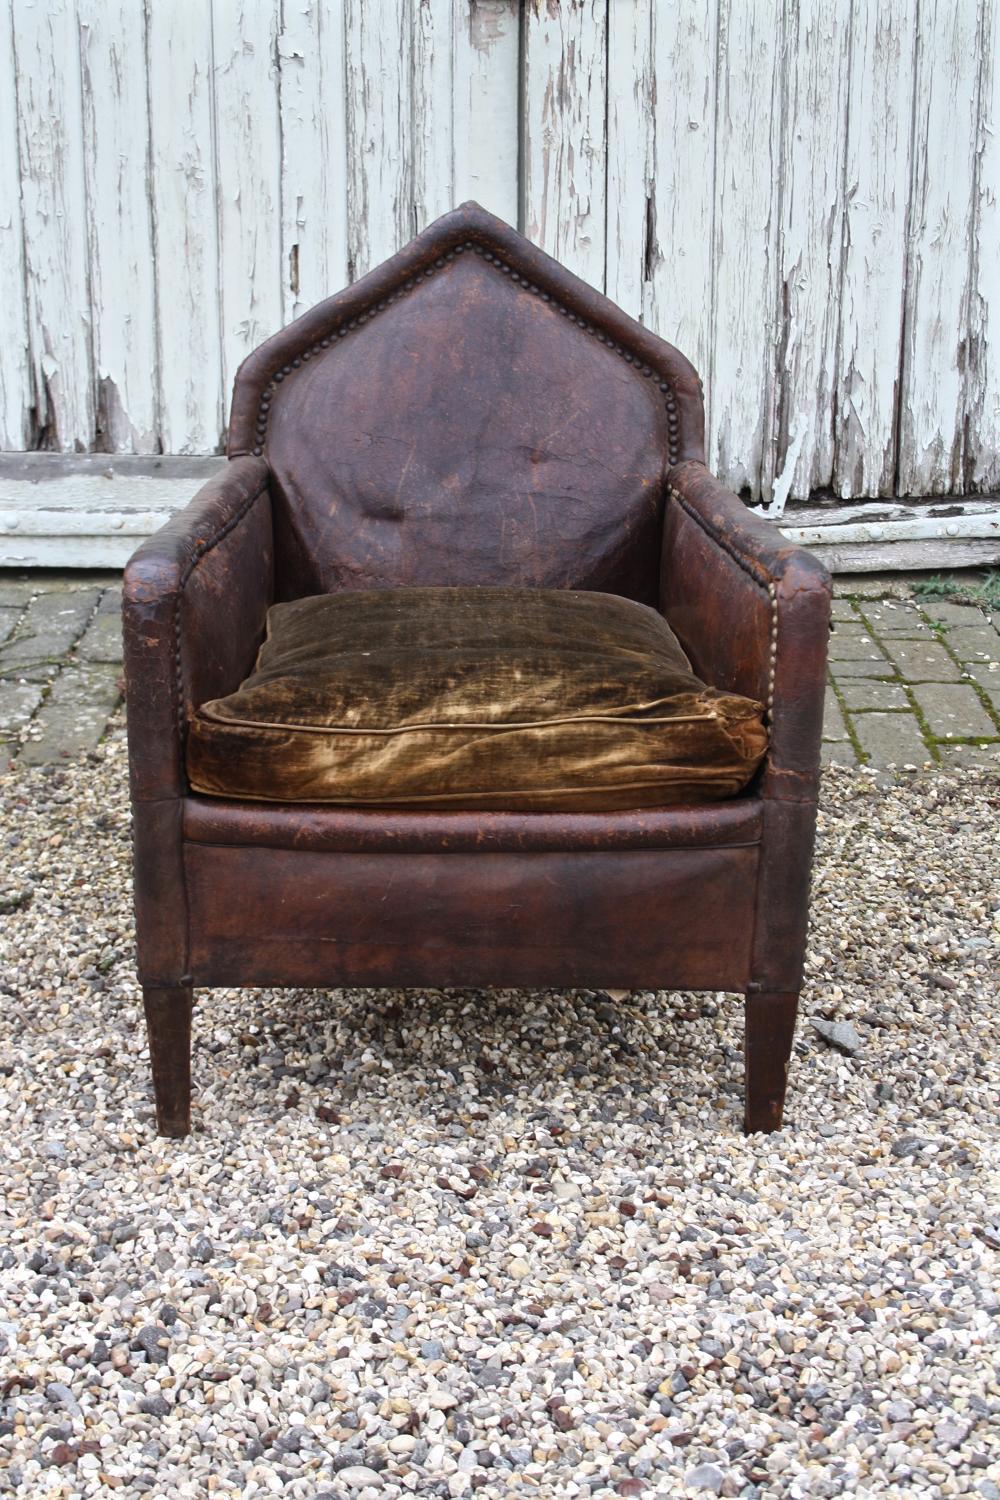 Early 1900s leather chair